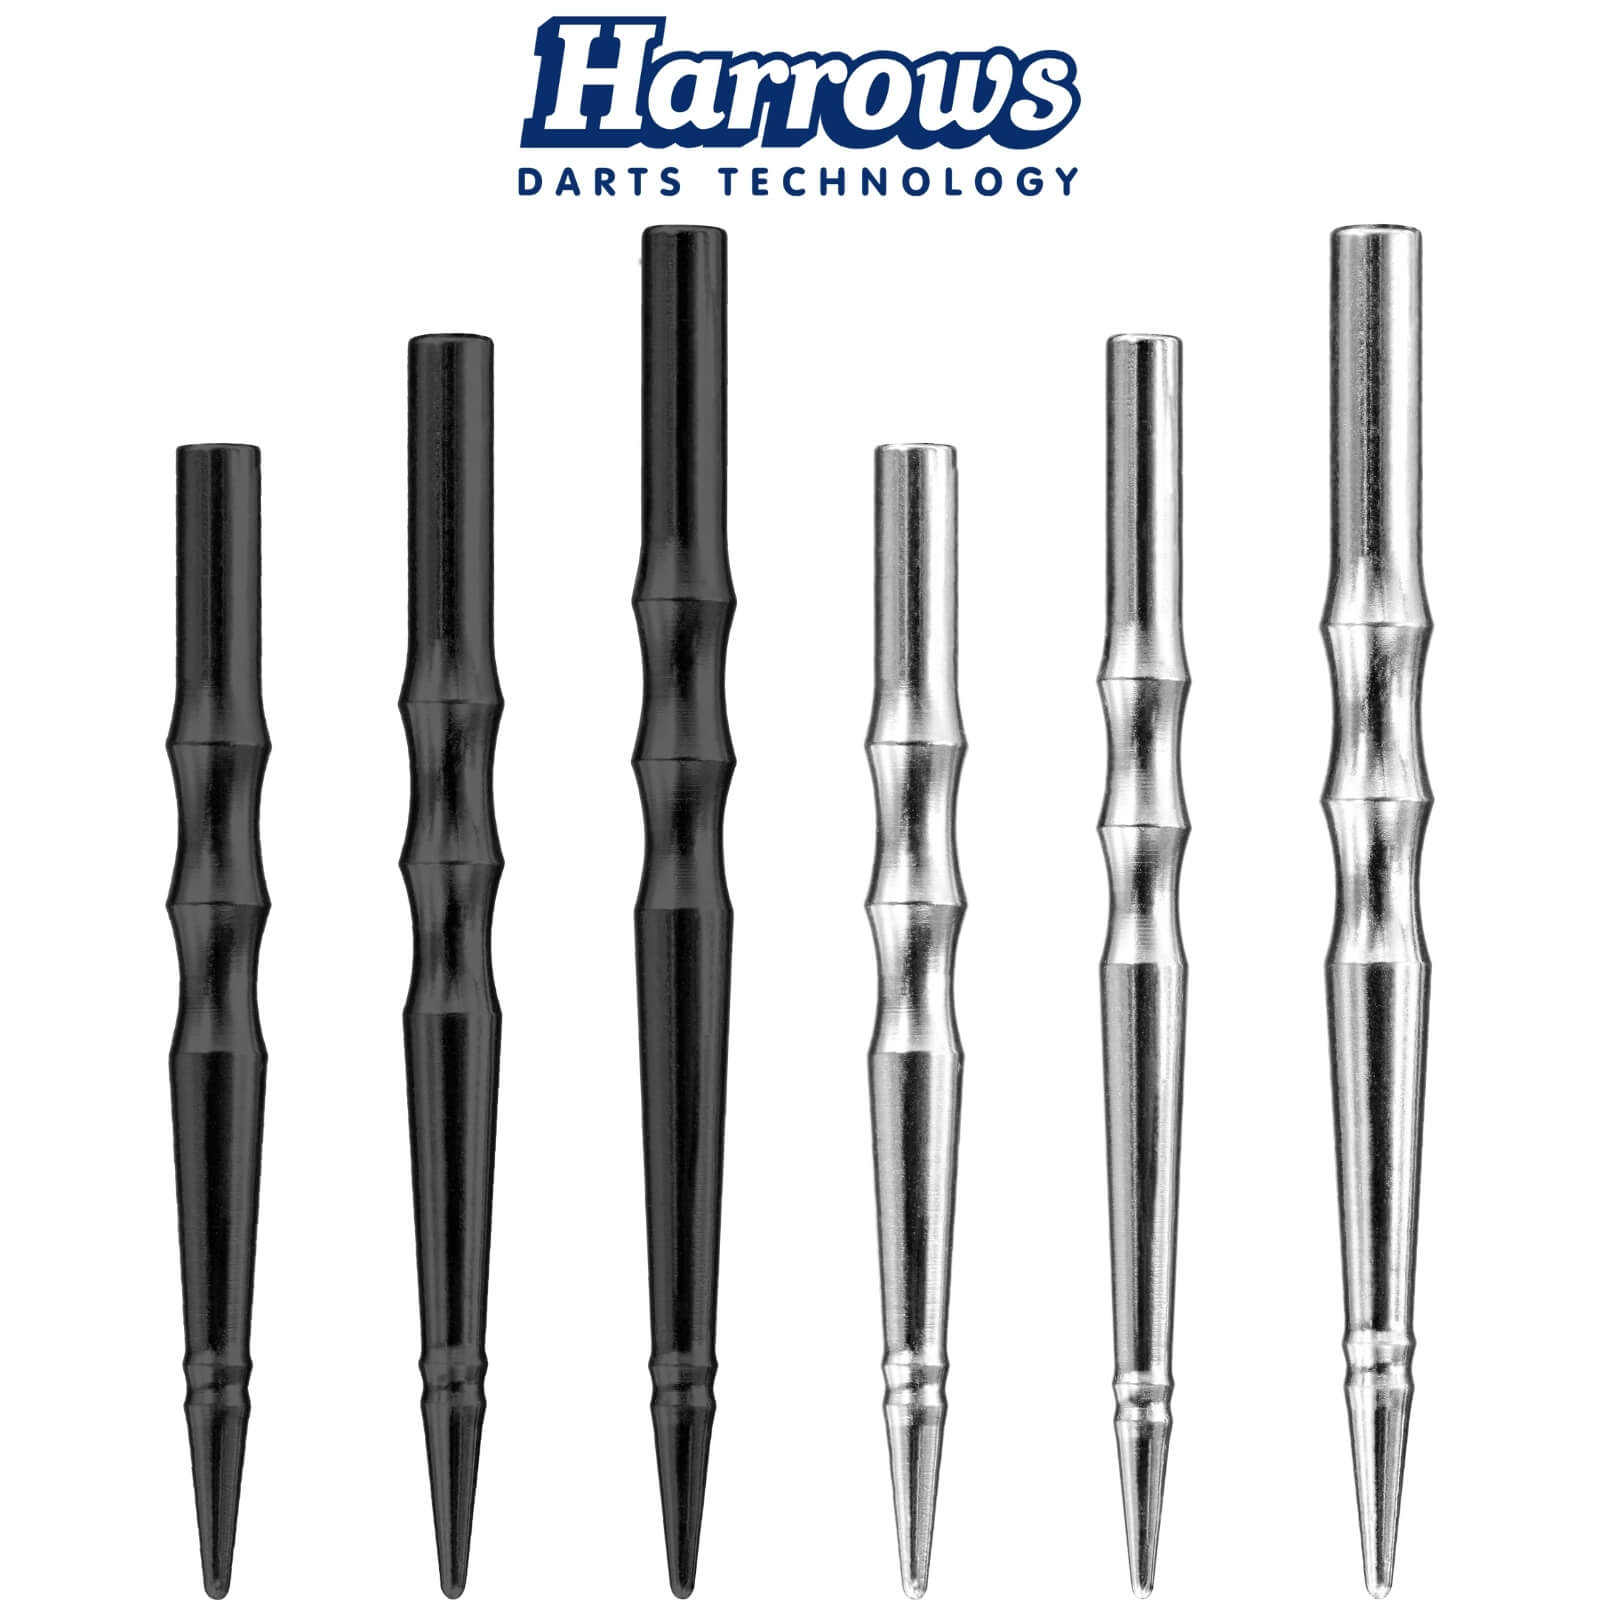 Point Accessories - Harrows - Sabre Machined Dart Points - 32mm 35mm 38mm 